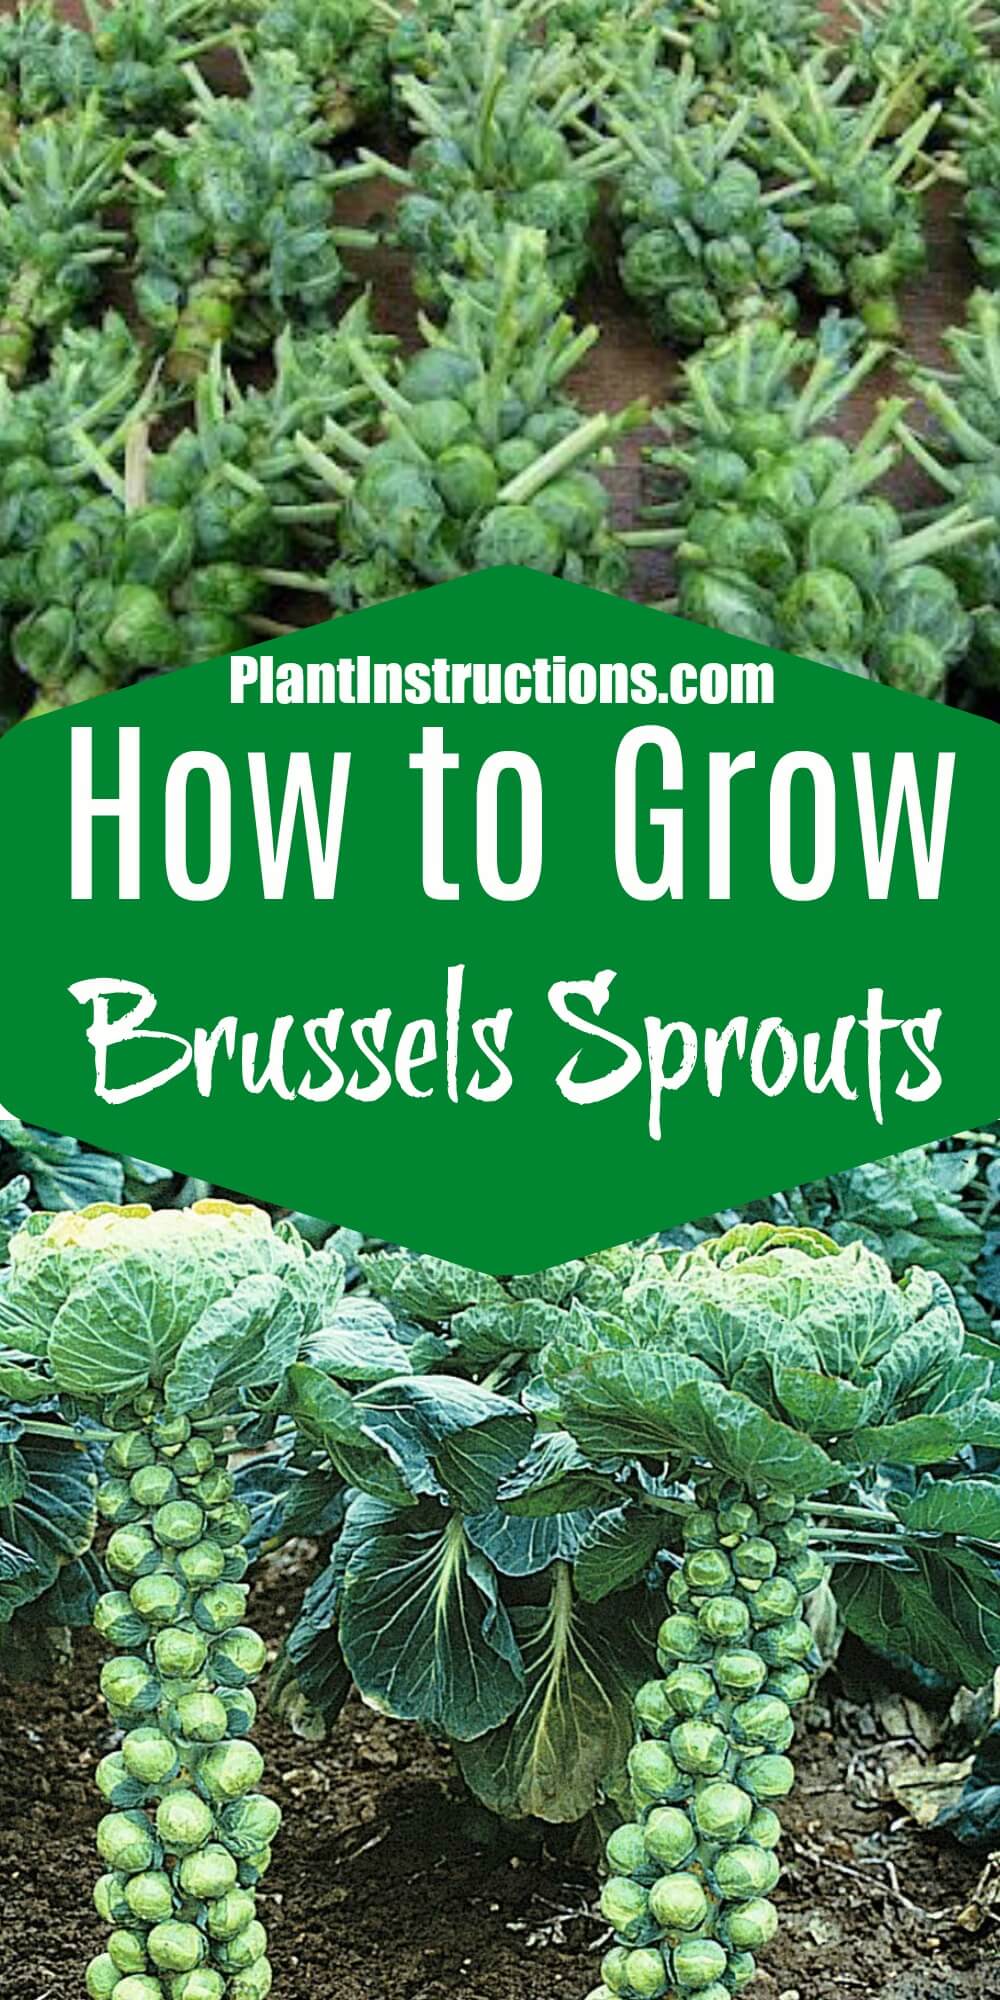 How to Grow Brussels Sprouts - Plant Instructions